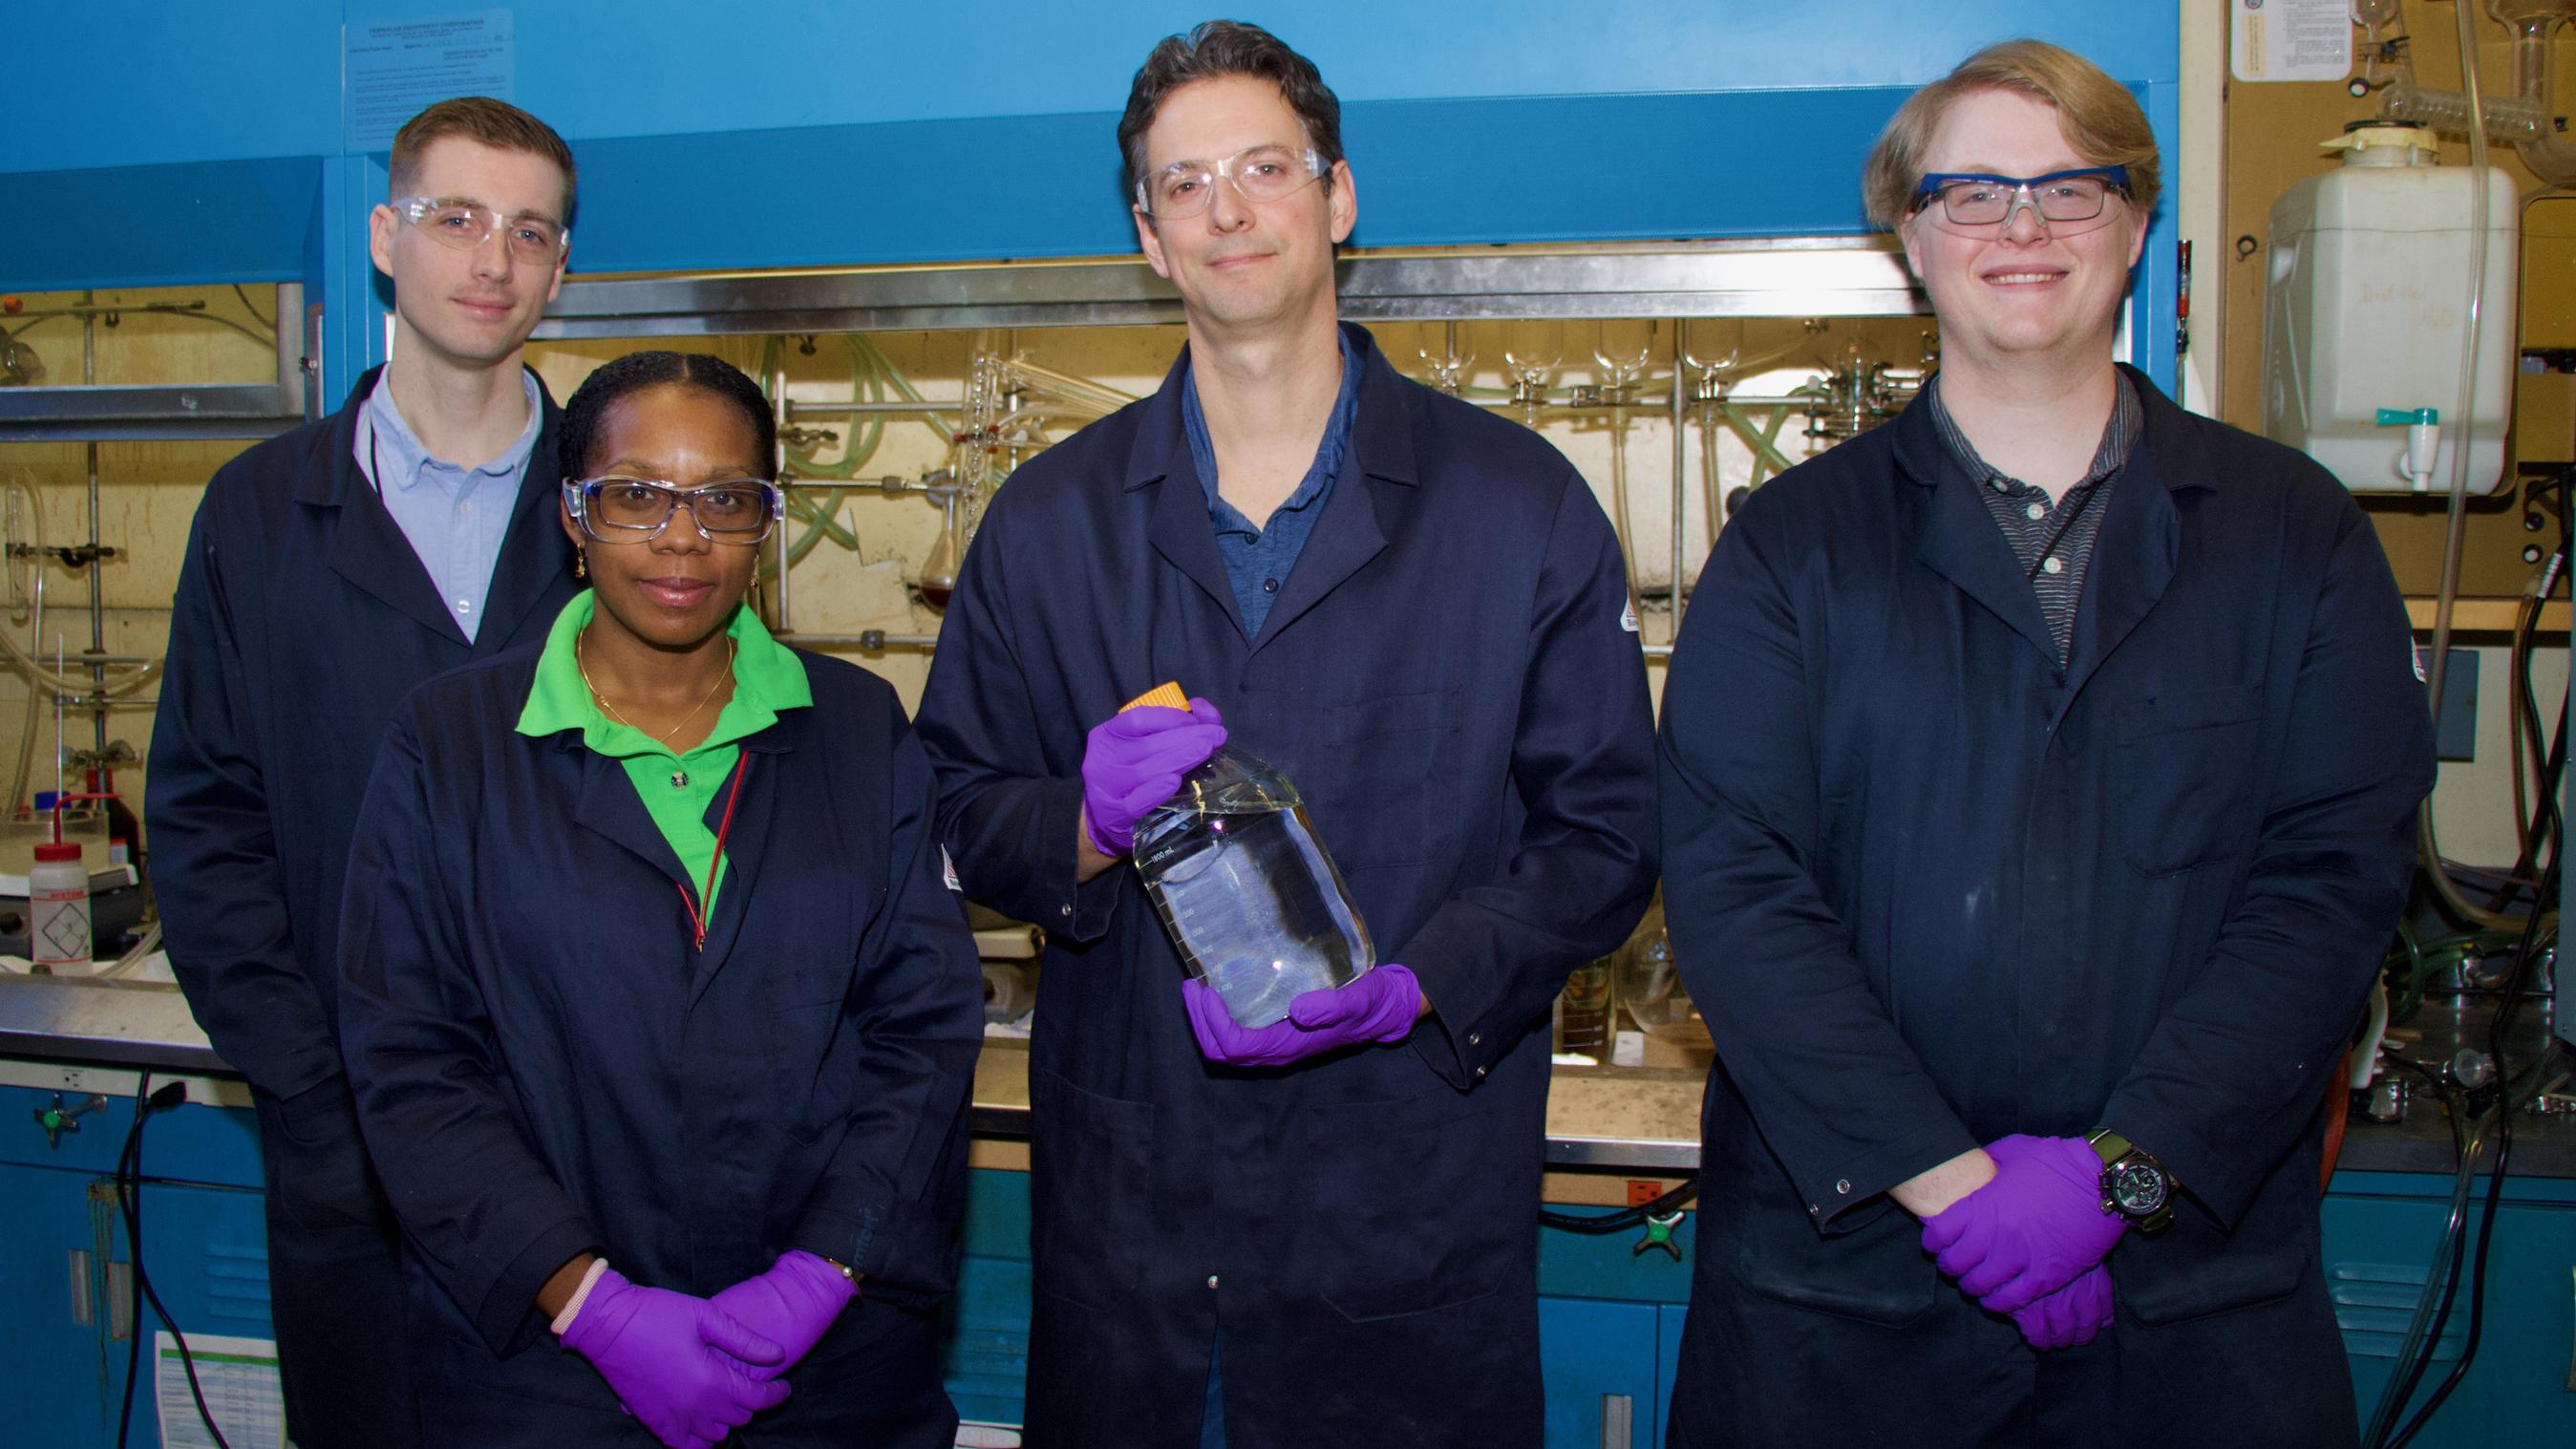 NAWCWD biosynthetic fuel research team